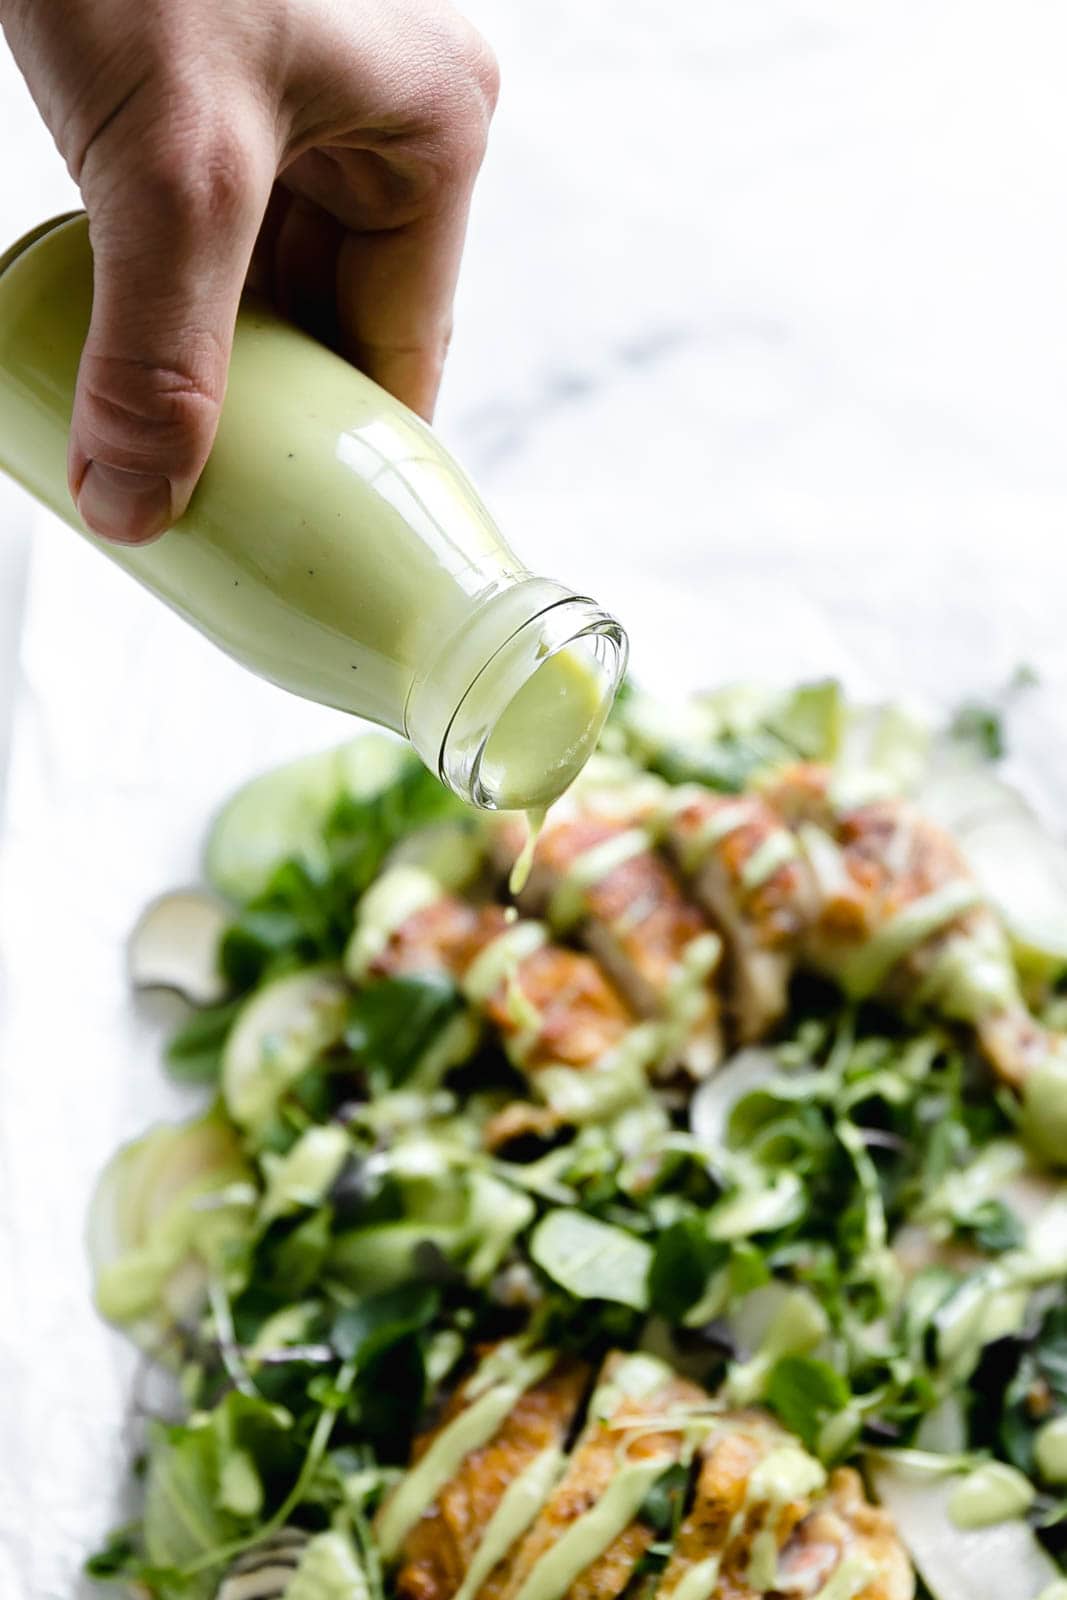 A loaded green chicken salad with watercress, green apples, farro, and a "creamy" dairy-free avocado dressing! So perfect for summer entertaining.